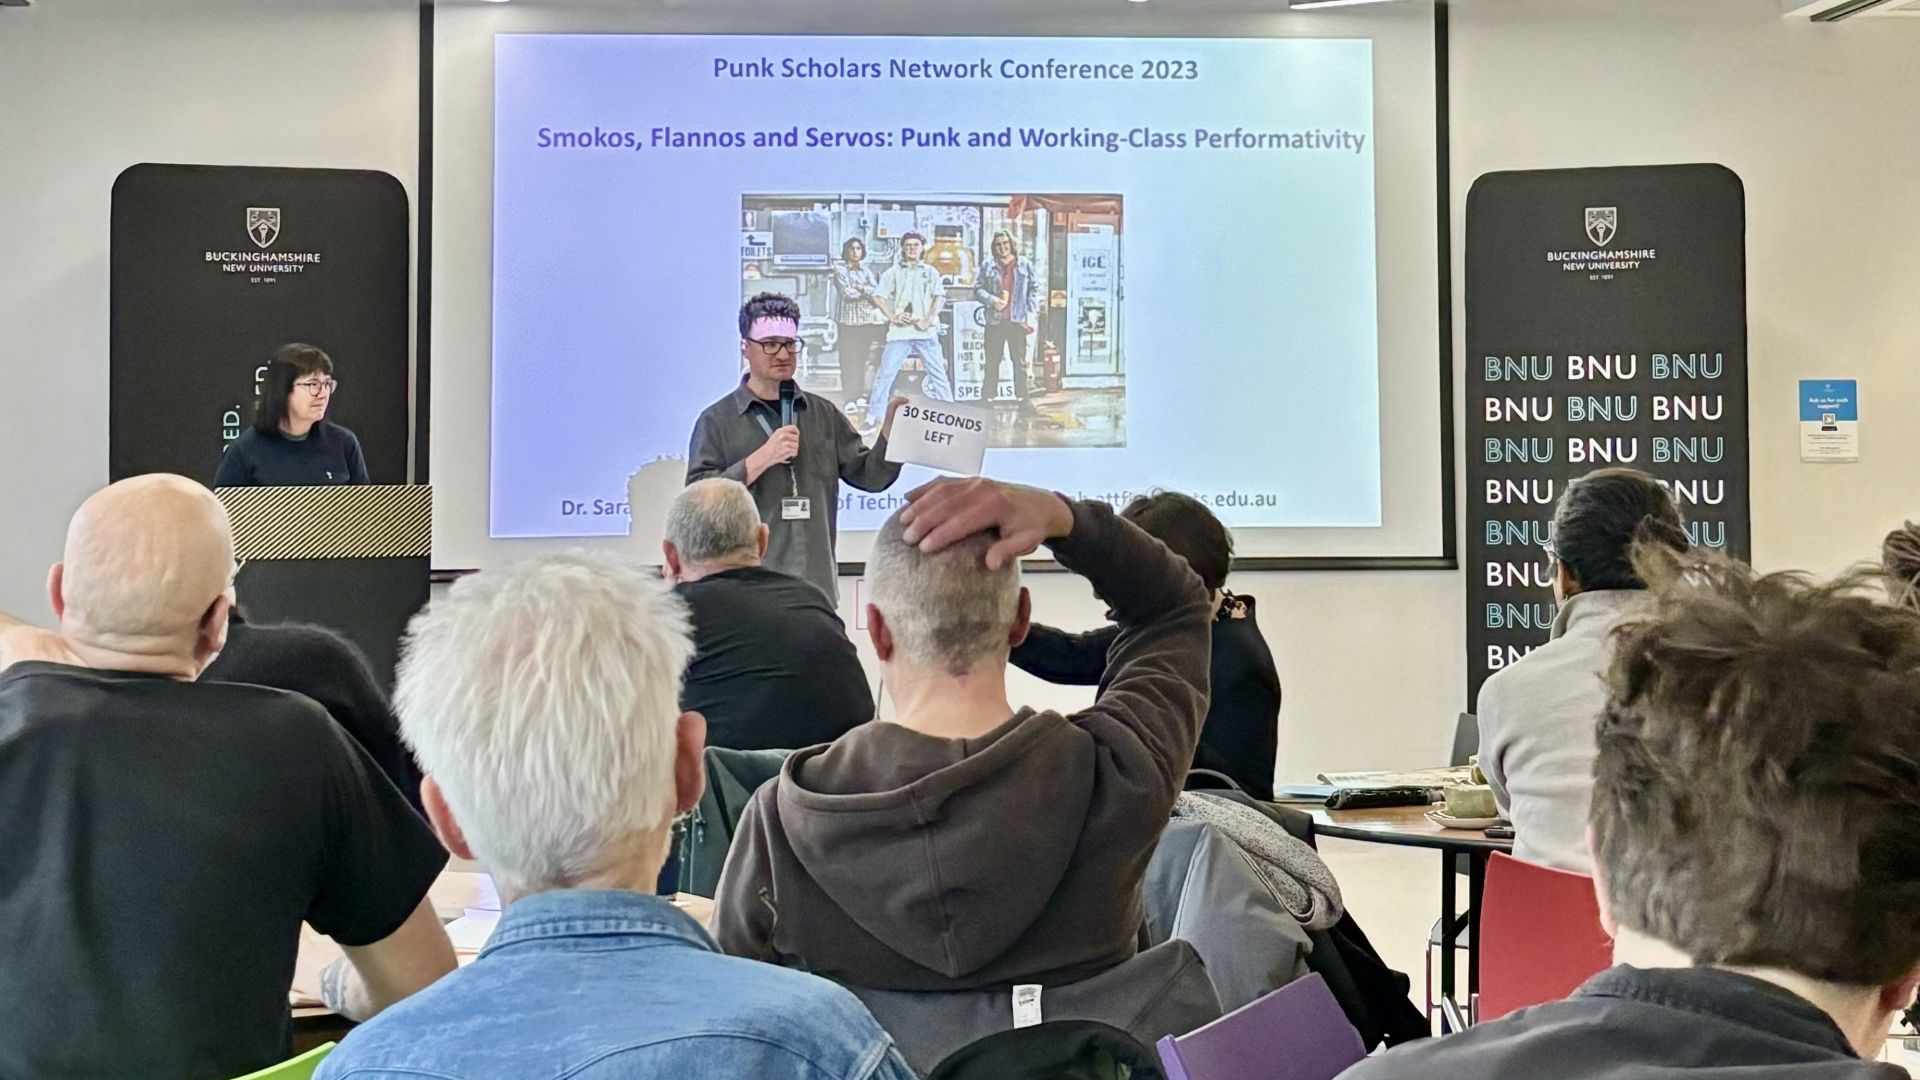 Paul Fields delivers presentation to attendees at Punk Scholars conference 